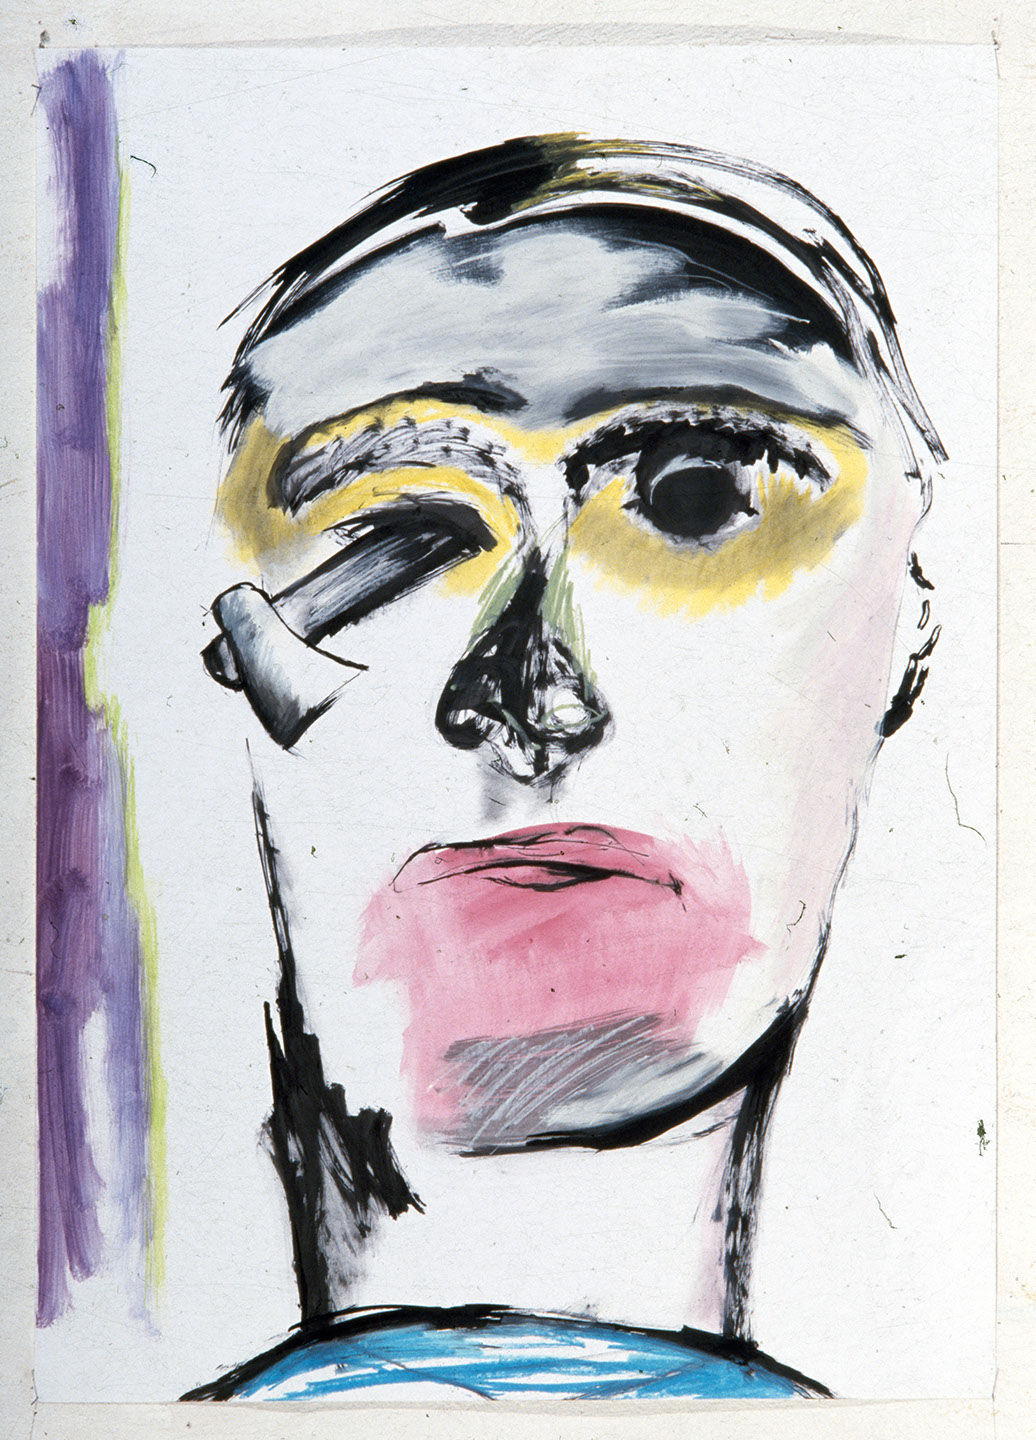 Title: Faces 6
Materials: Acrylic, Ink, Oil Pastel on paper
Size: 100x70 cm
Year: 1986